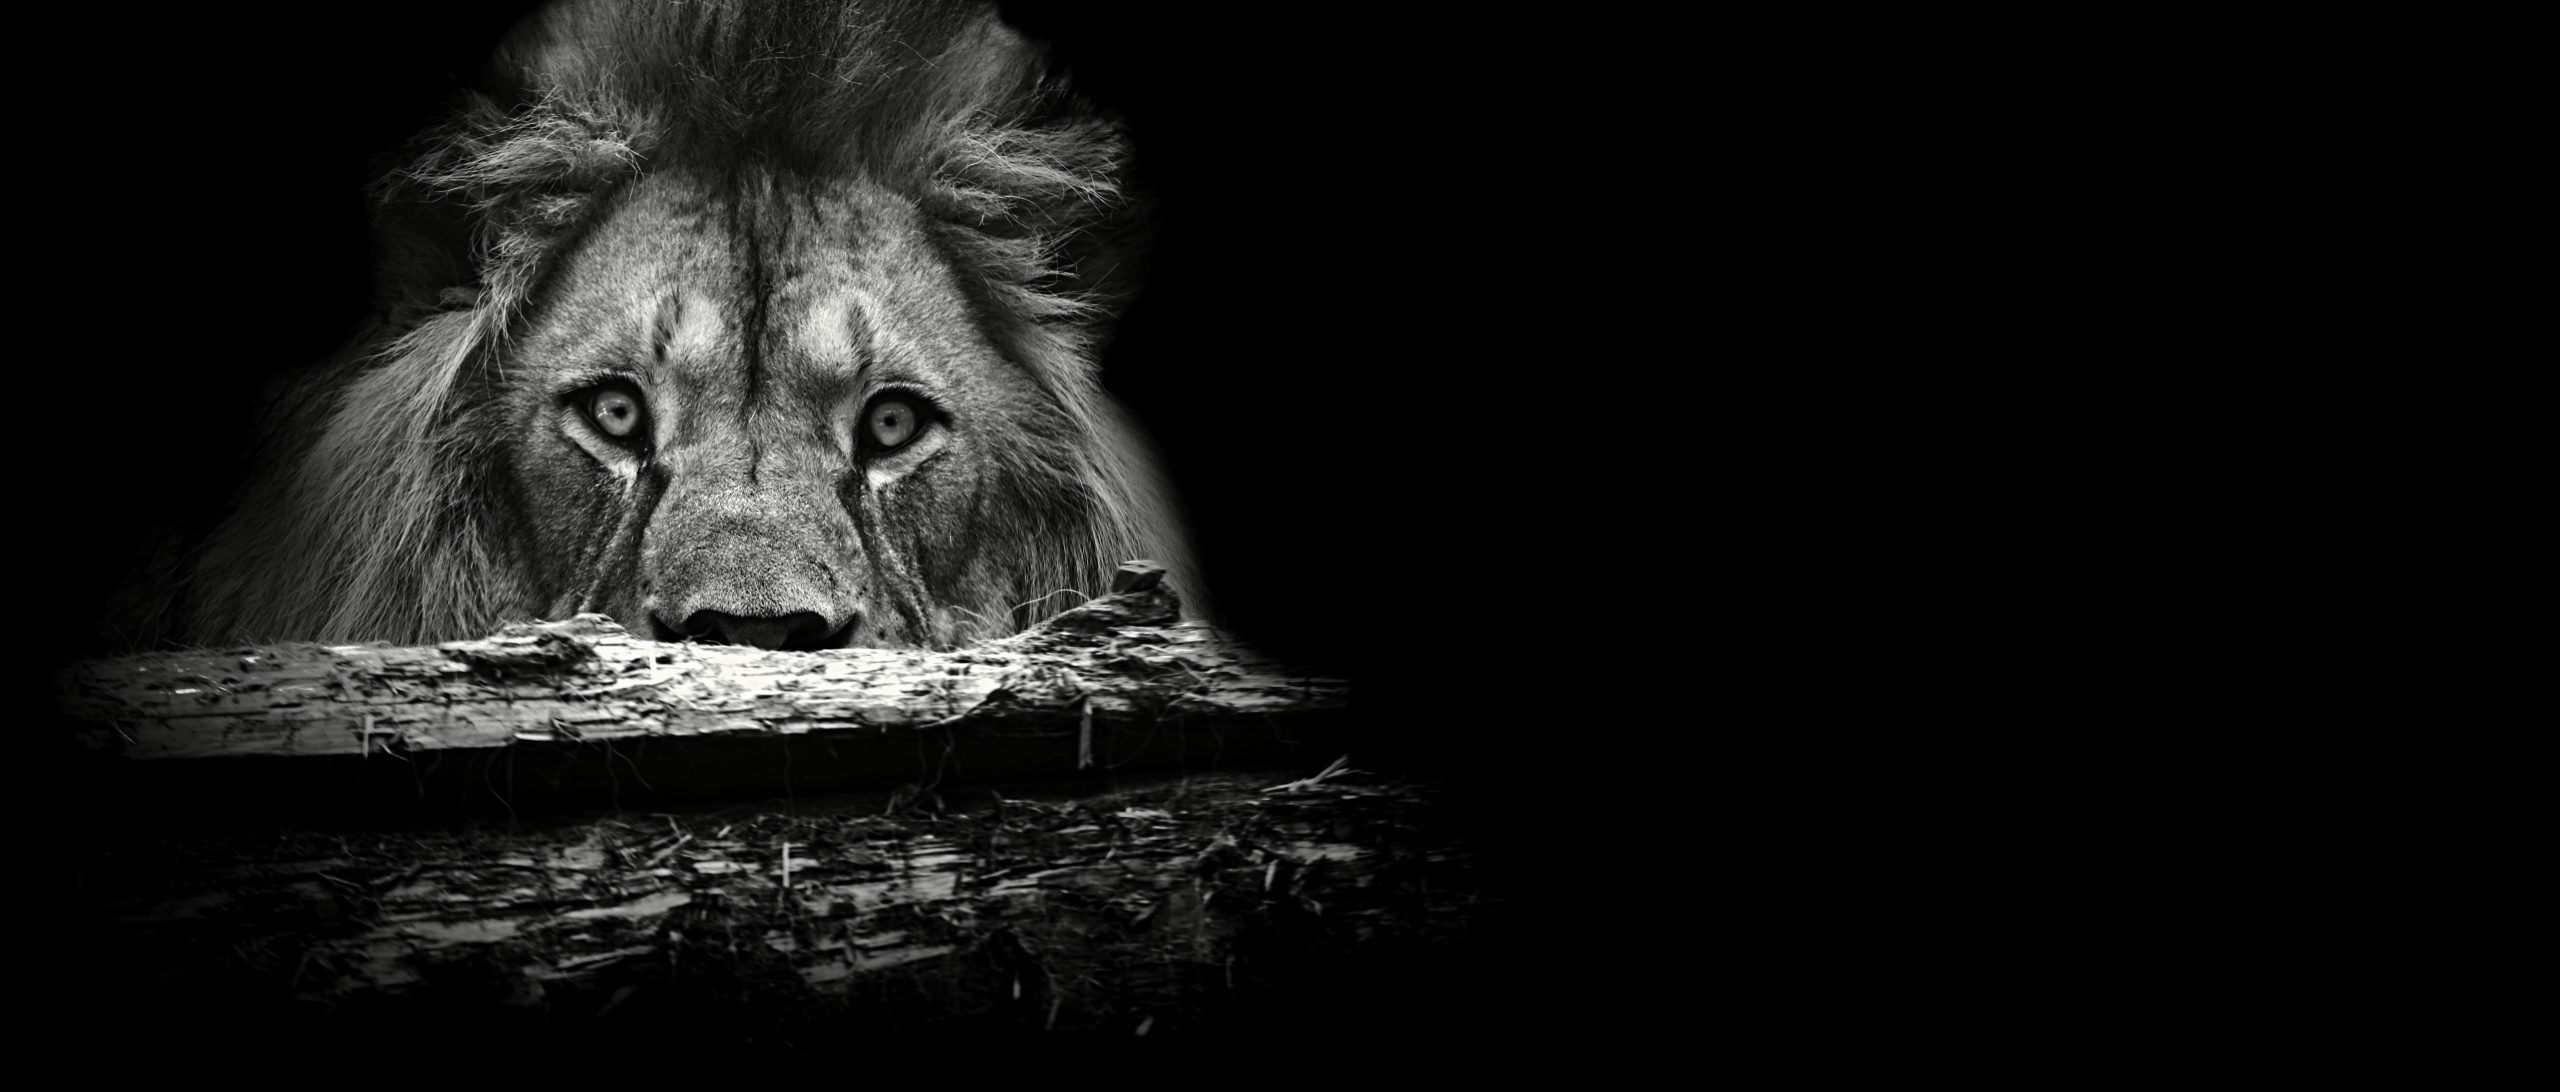 7 lessons from a leadership lion